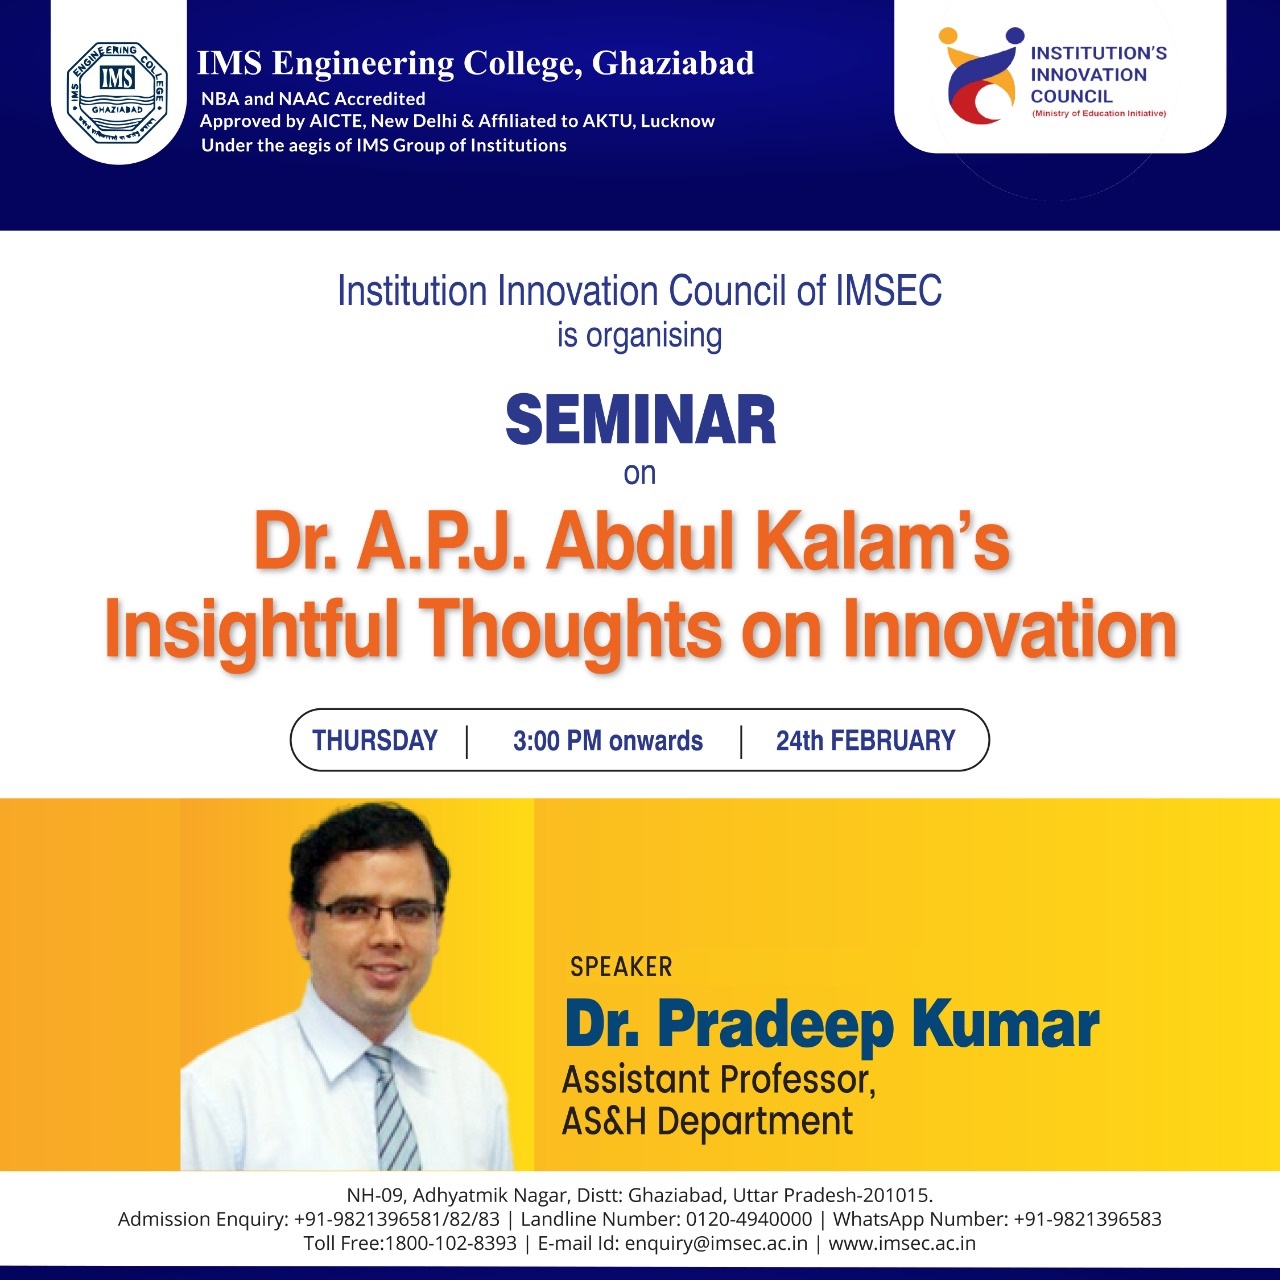 Innovation Council (IIC) of IMSEC is organizing a seminar on the theme of Dr. A.P.J. Abdul Kalam insightful thoughts on Innovation